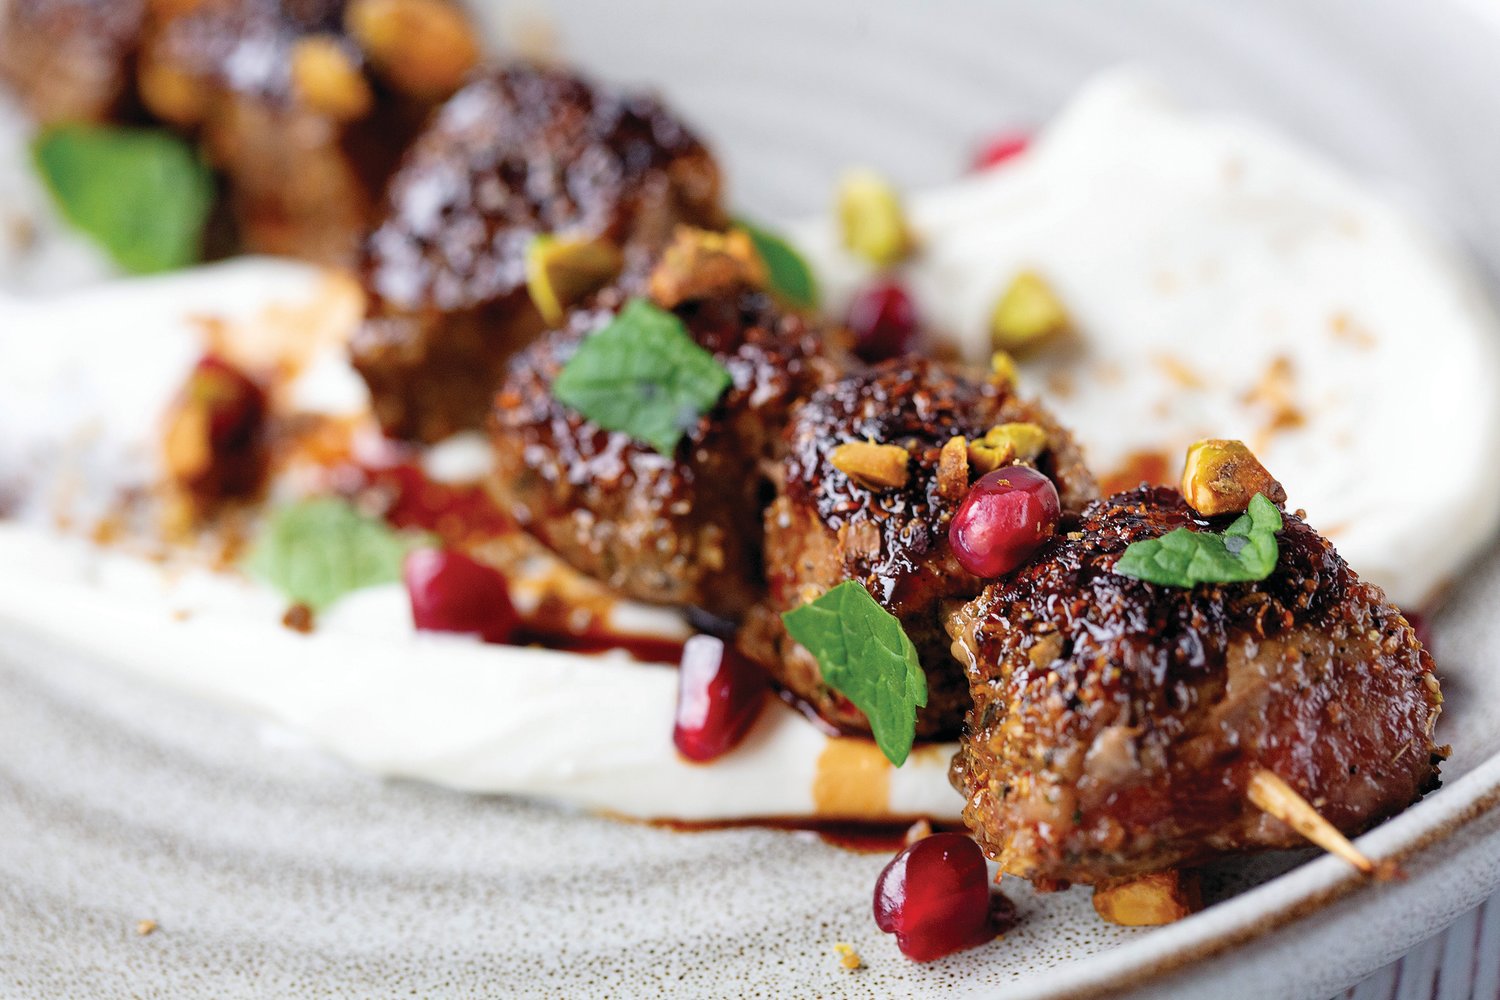 Lamb skewers are among the most popular items on the small-plates menu at the new Ardana Food & Drink restaurant at Valley Square in Warrington. Photograph by Ardana.